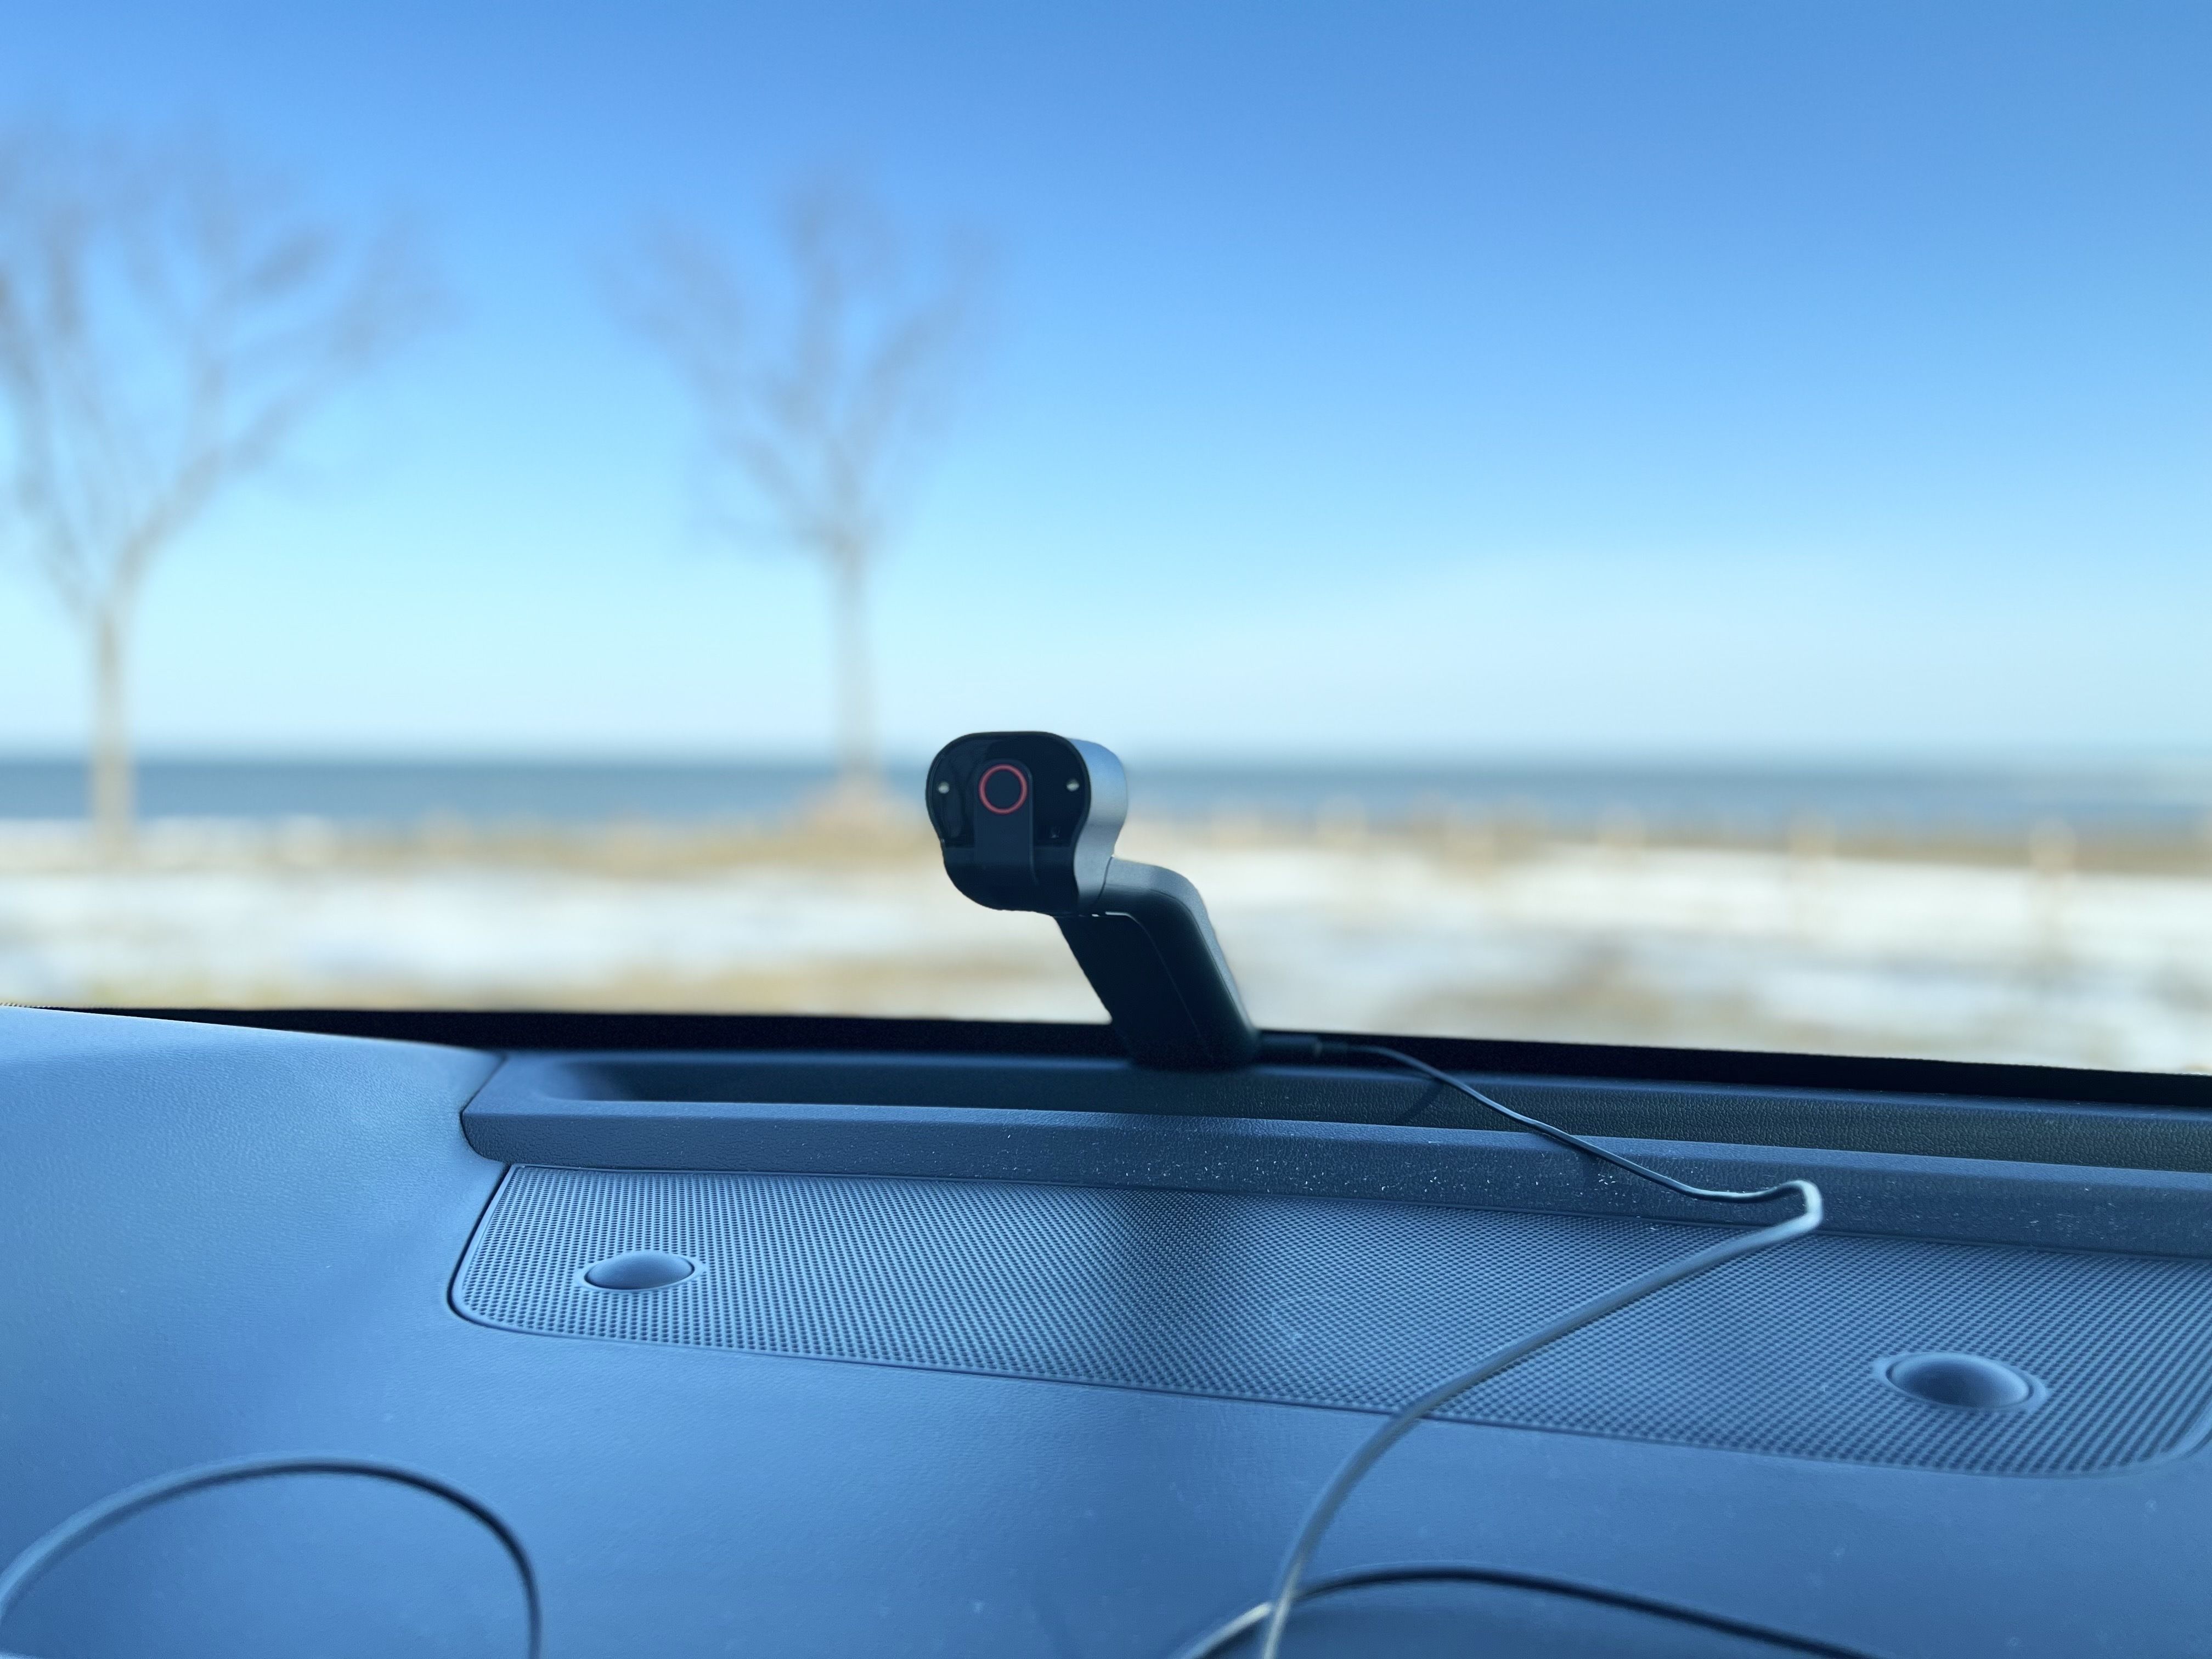 Not even 24 hours after install of car cam windshield is cracked. : r/Ring